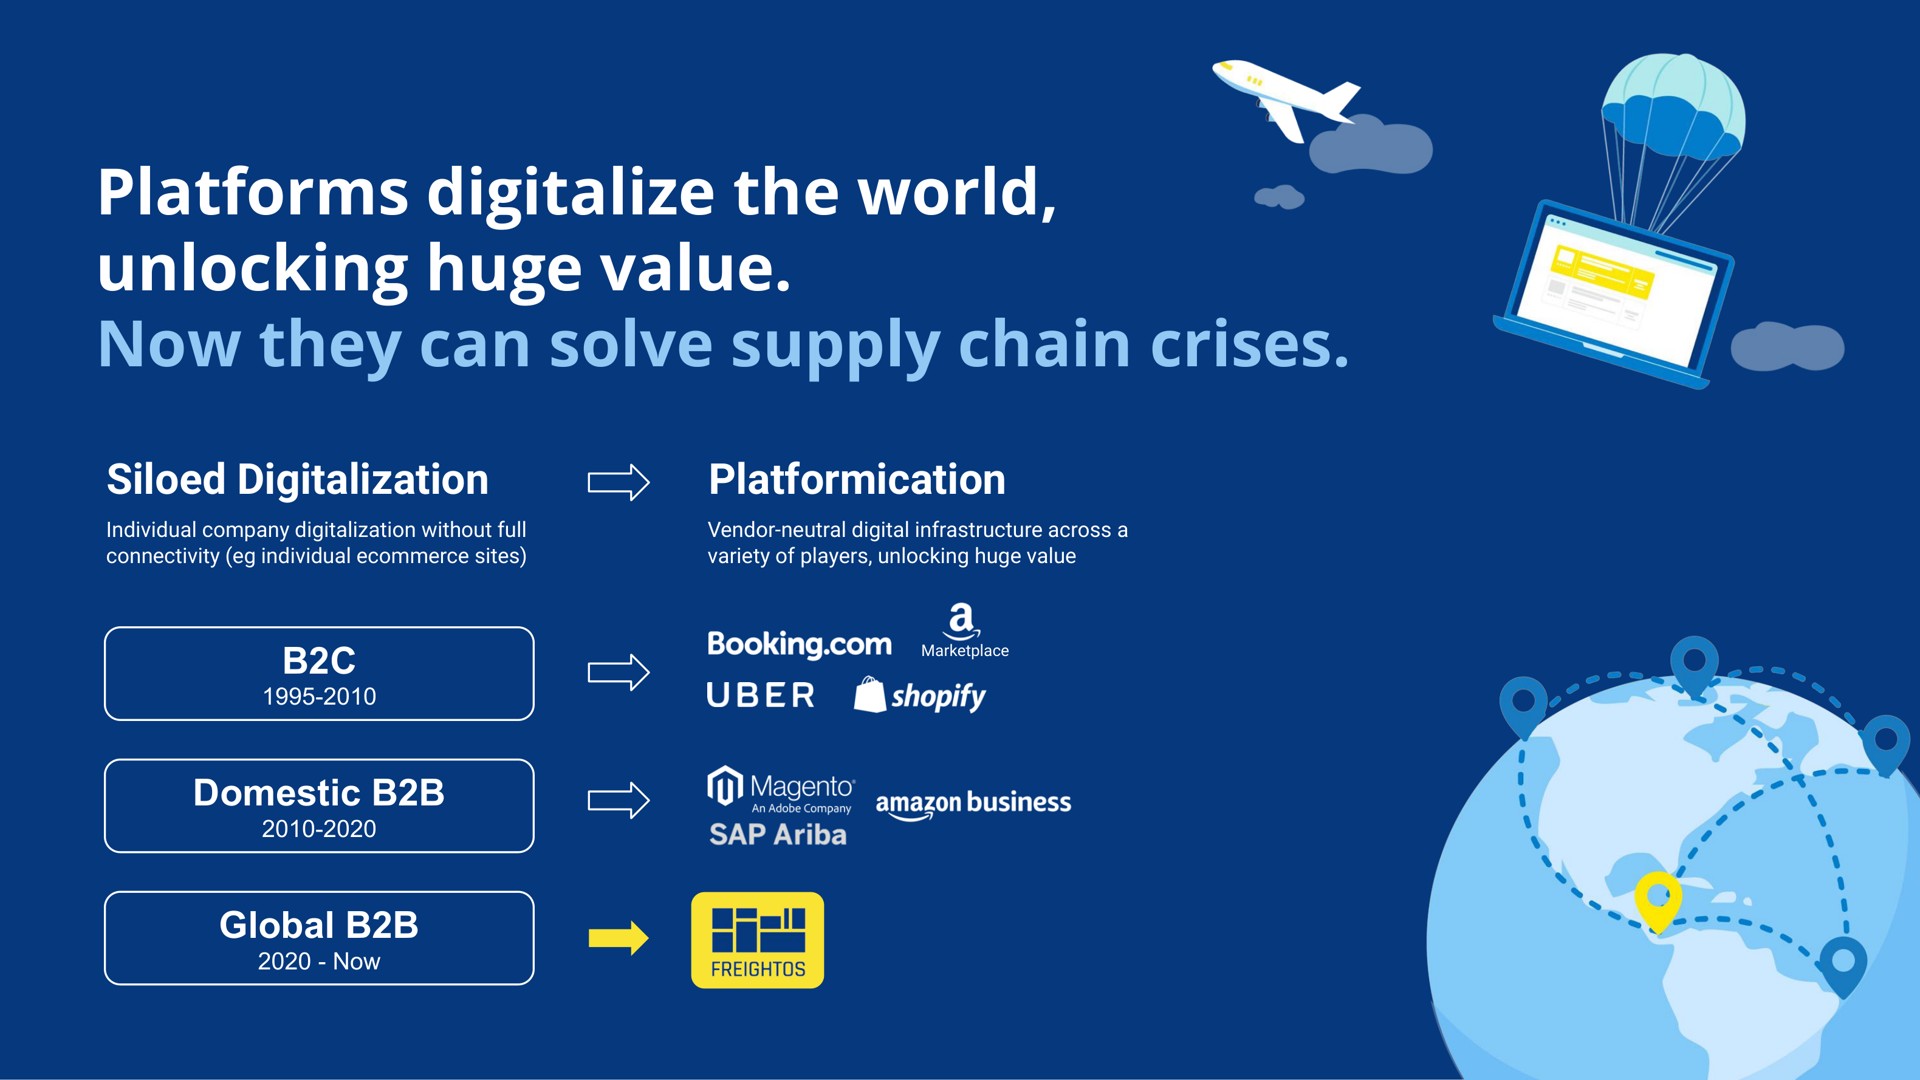 platforms digitalize the world unlocking huge value now they can solve supply chain crises a | Freightos